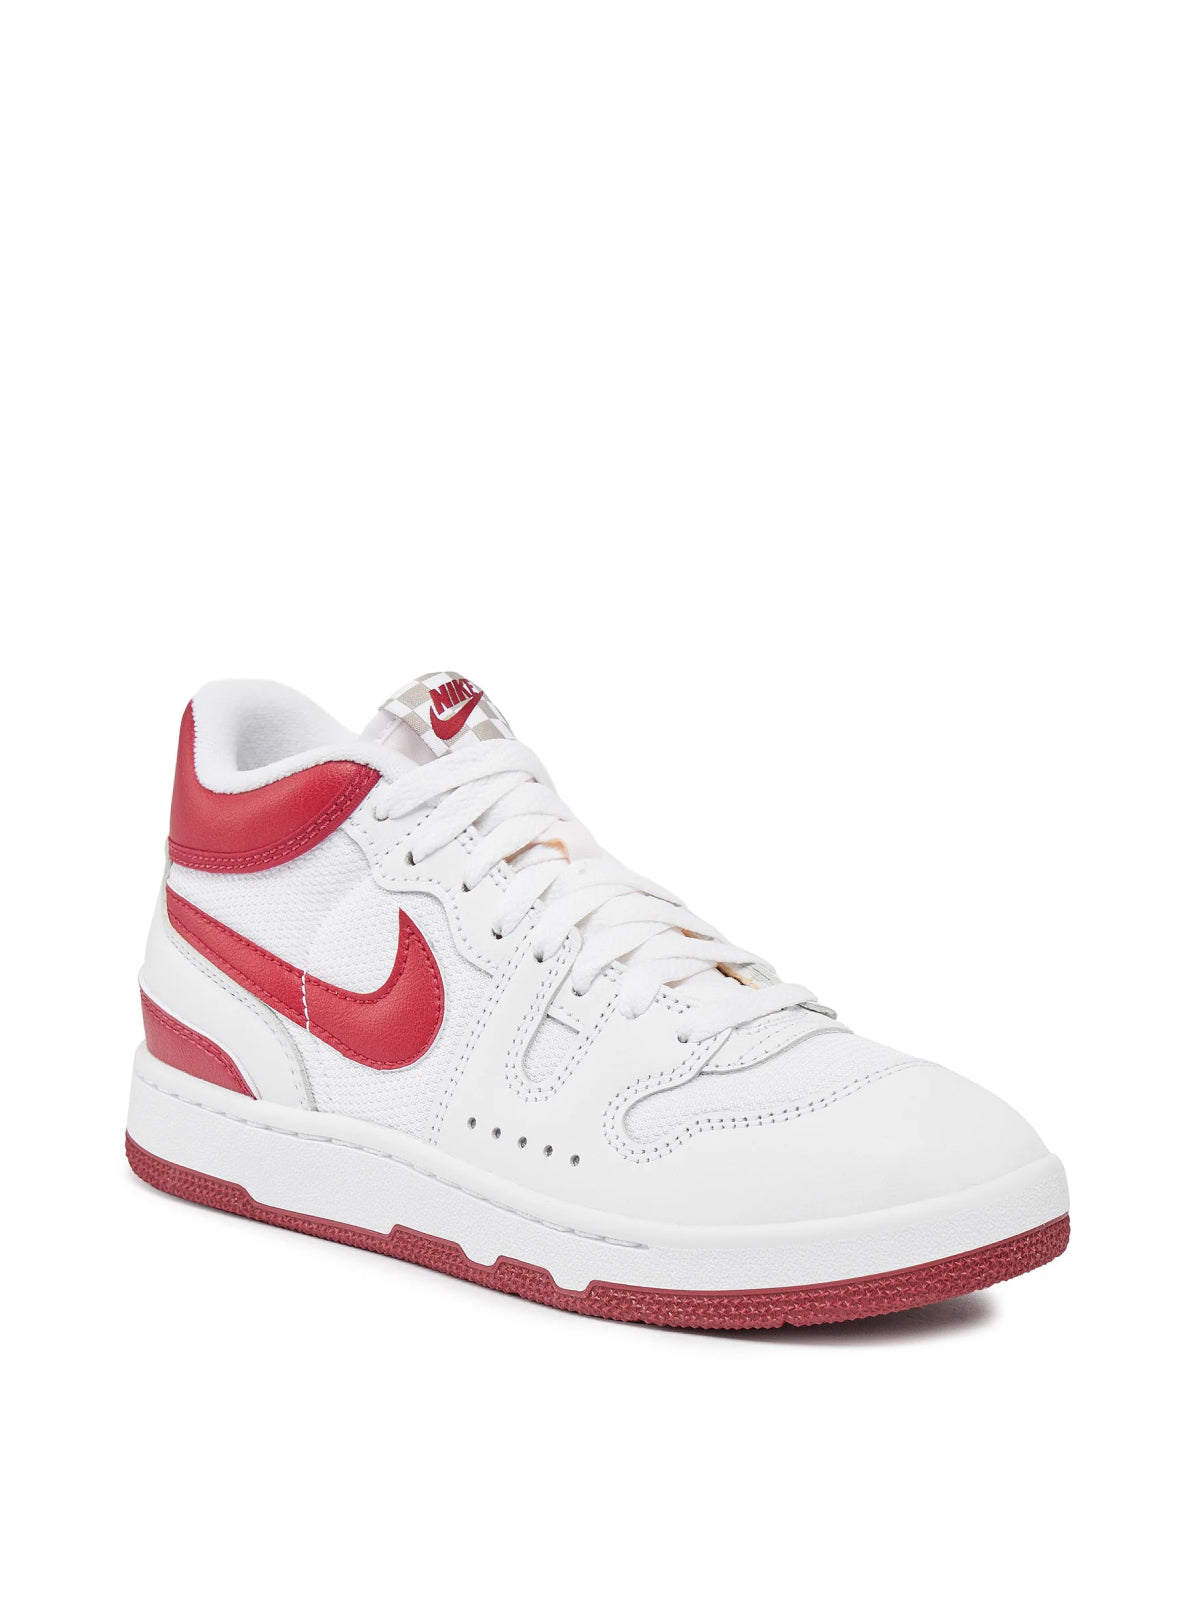 Nike-OUTLET-SALE-Attack QS SP Sneakers-ARCHIVIST